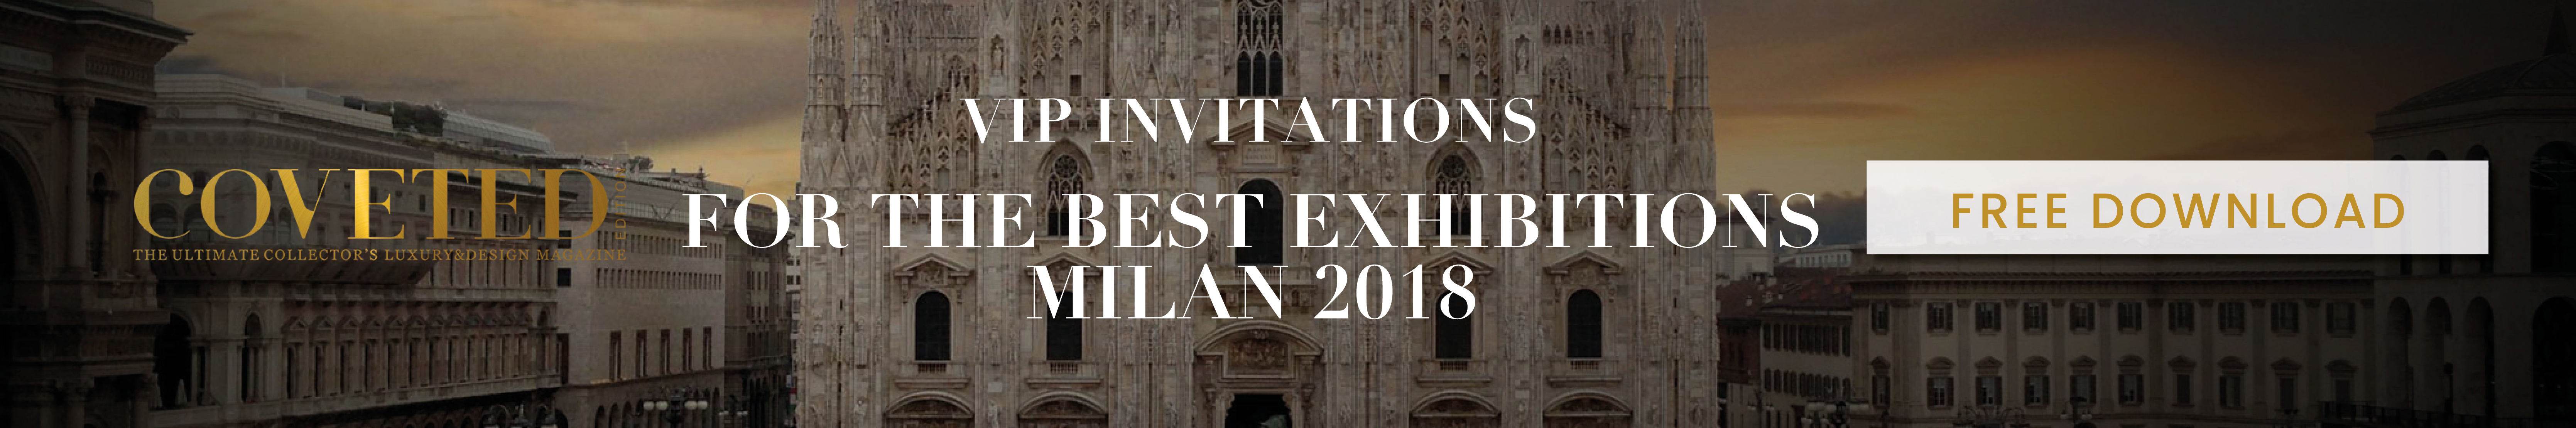 Isaloni 2018 – The Best Design Event Starting Today In Milan